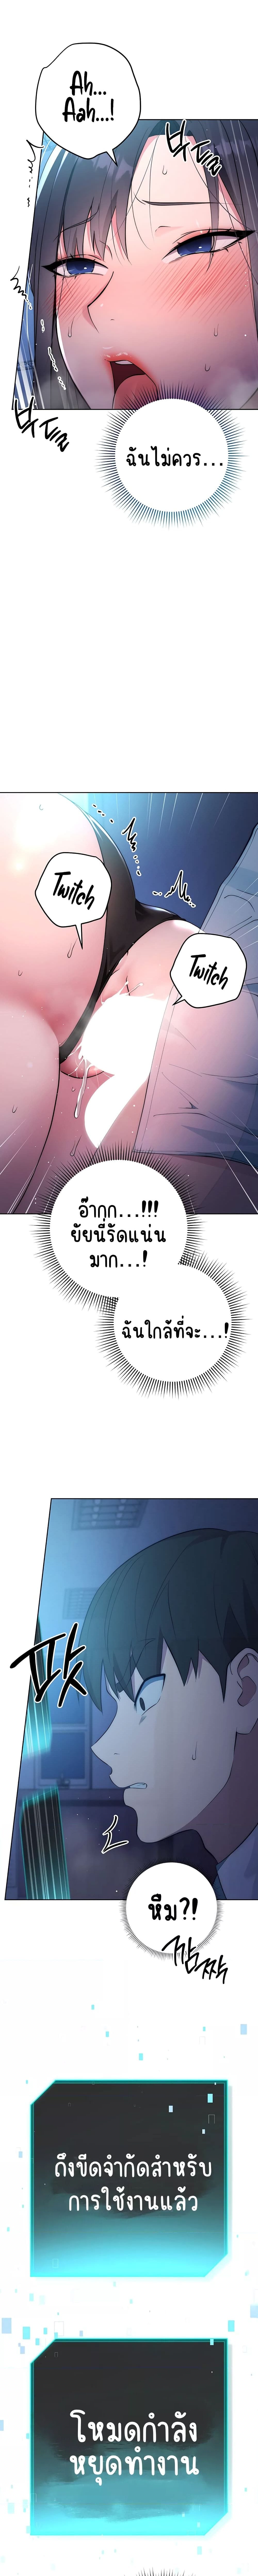 Outsider: The Invisible Man ตอนที่ 3 ภาพ 17